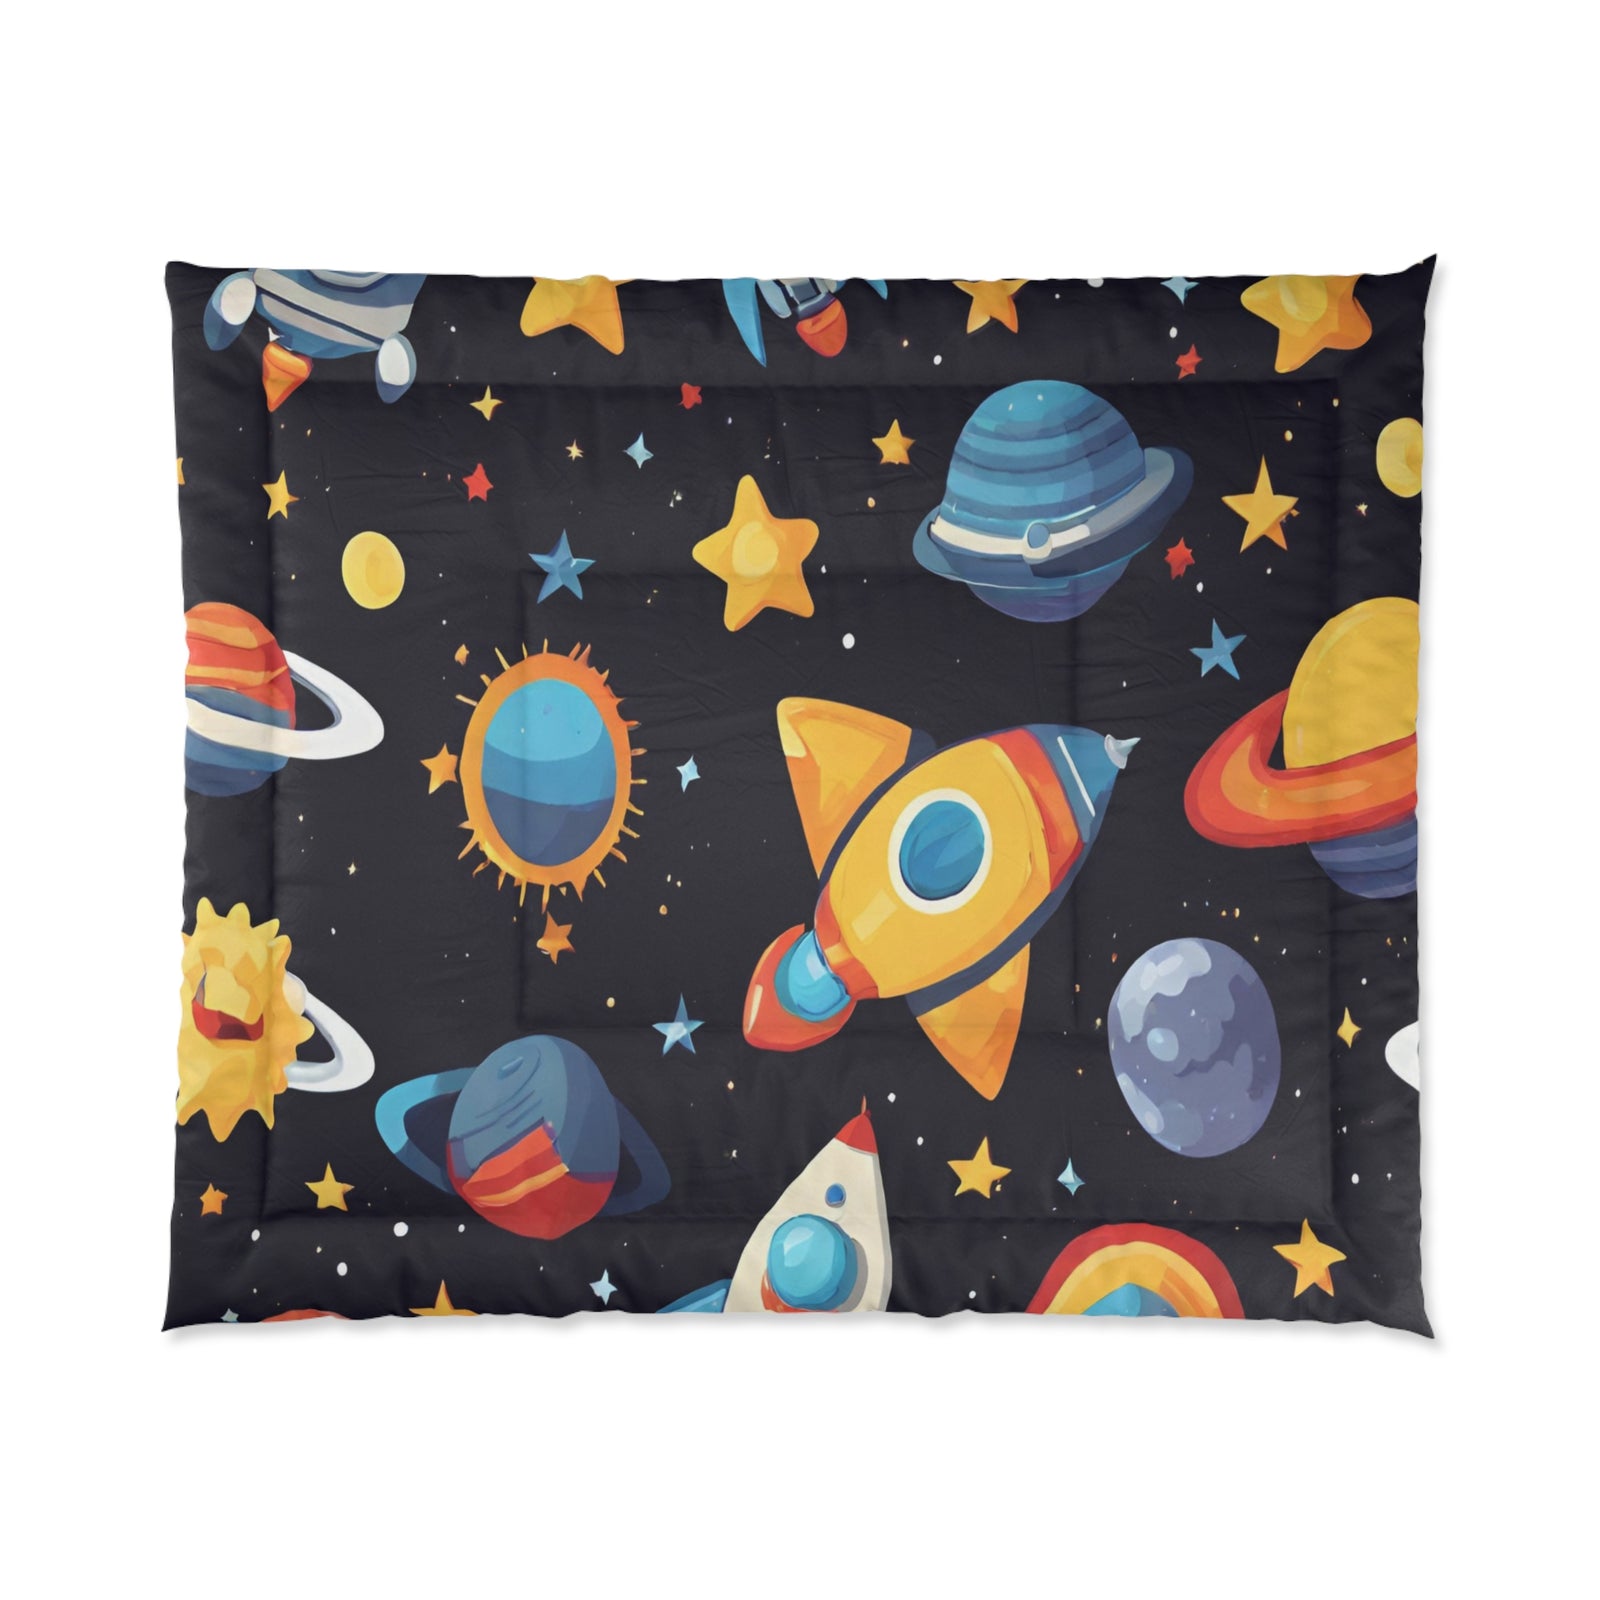 Galaxy Dreams Comforter: Cosmic Imaginations, Starry Lights, and Sweet Dreams for Kids